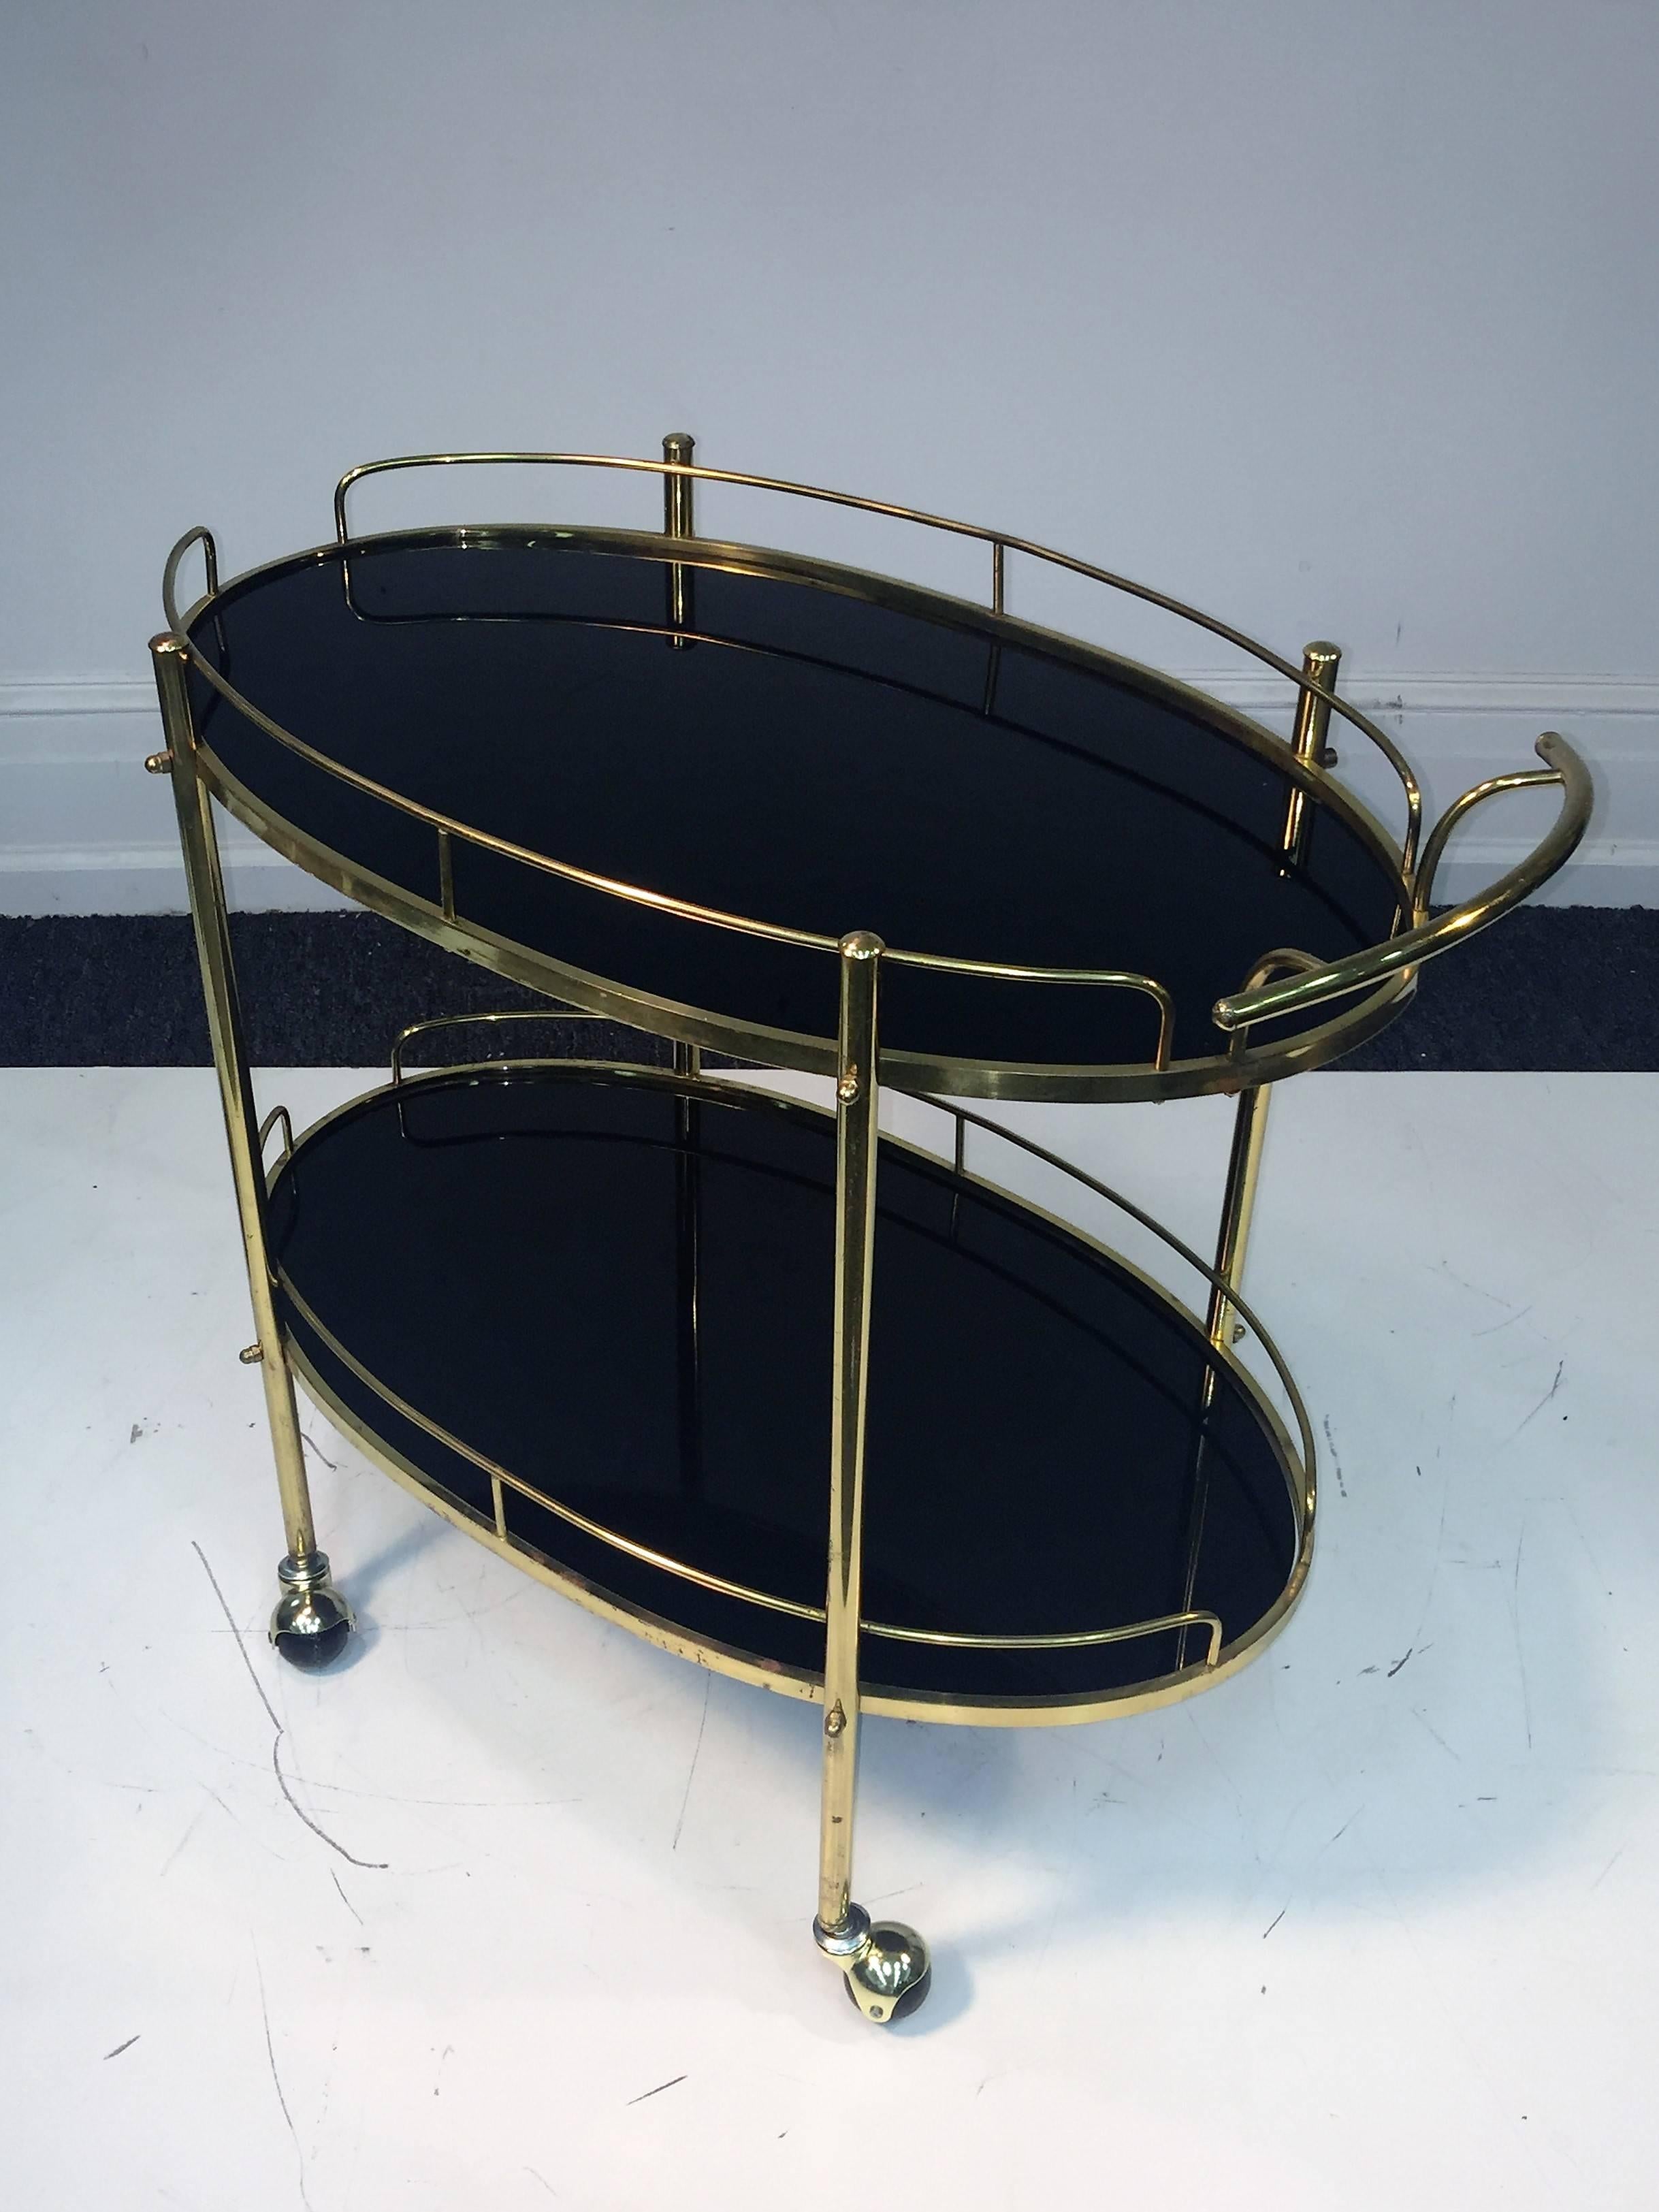 Great tubular brass modern bar cart with beautiful rare solid black glass oval shelves. Simple and elegant design suited for many interiors on black and brass caster wheels. The great quality oval black glass is removable for easier cleaning.